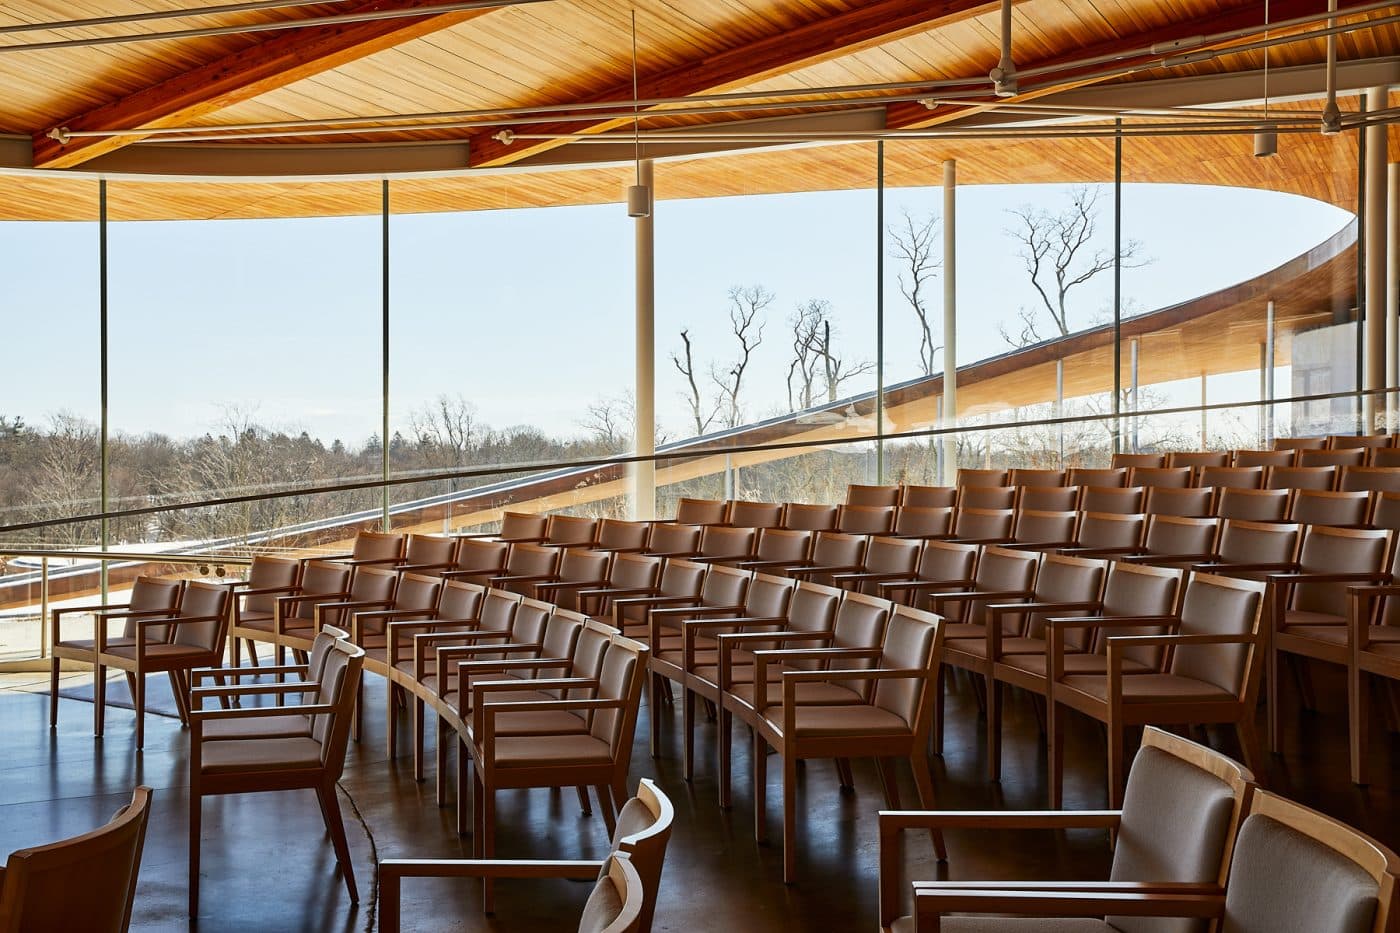 Grace Farms' 11,000-square-foot indoor amphitheater